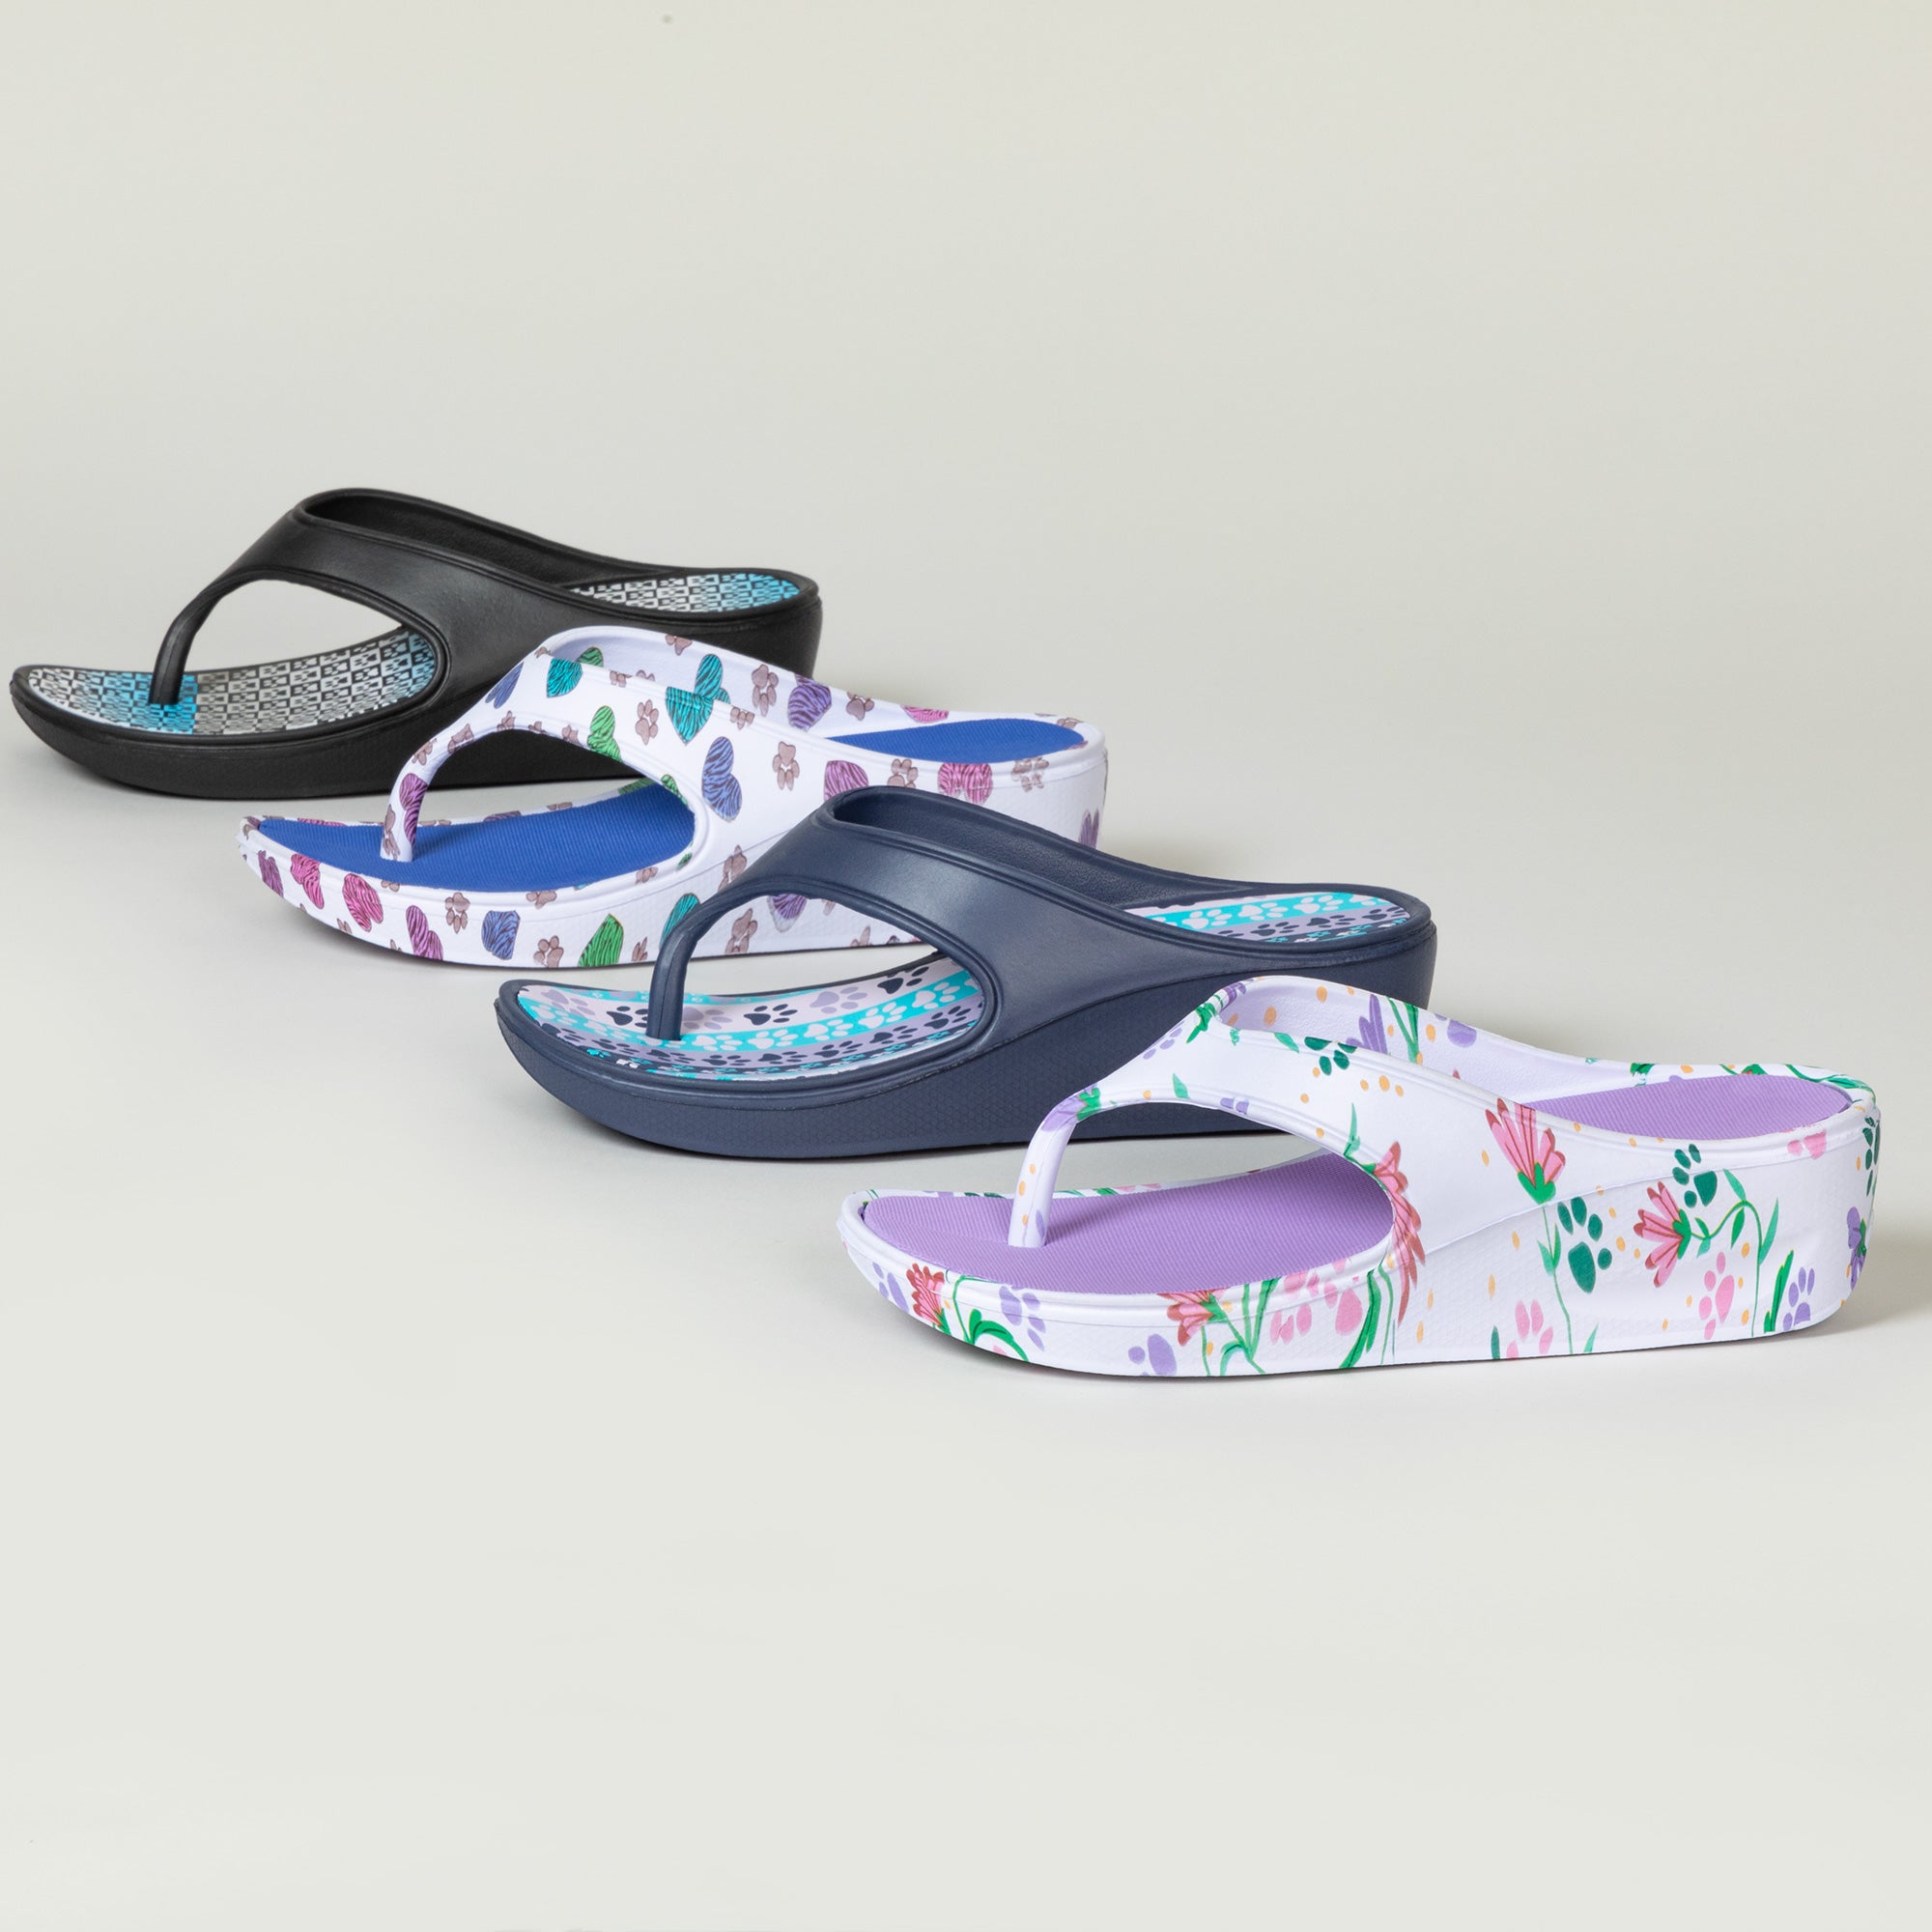 Paw Print Wedge Flip Flops - Paws In The Garden - 10